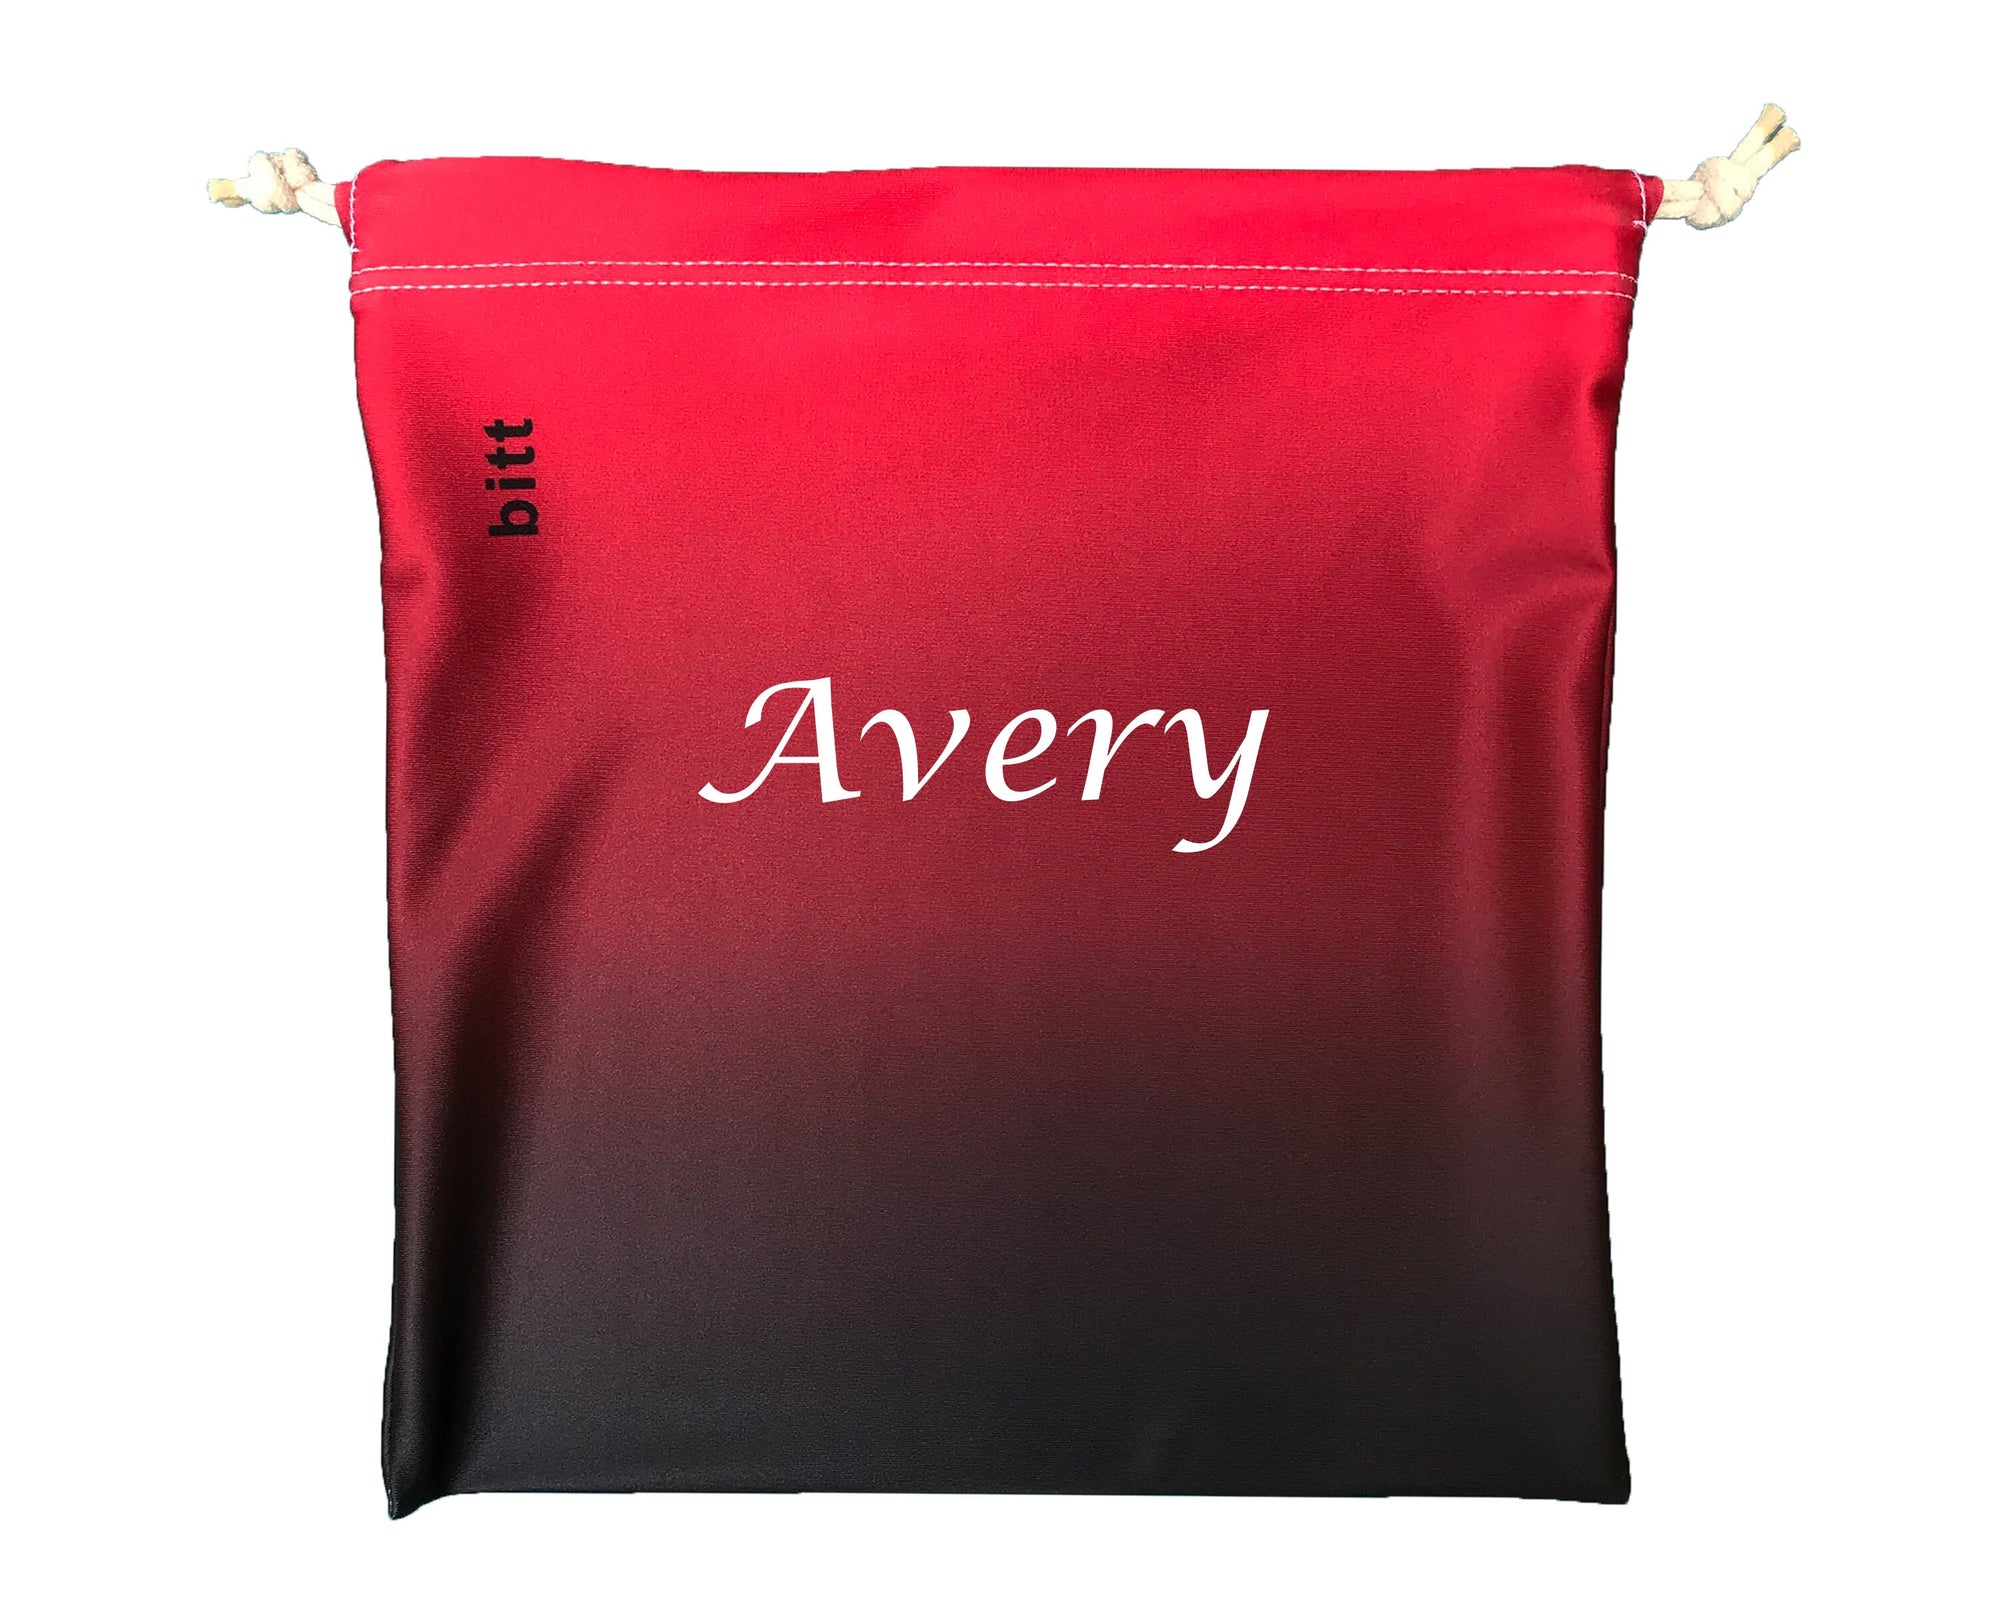 Personalized Gymnastics Grip Bag - Red and Black Ombre